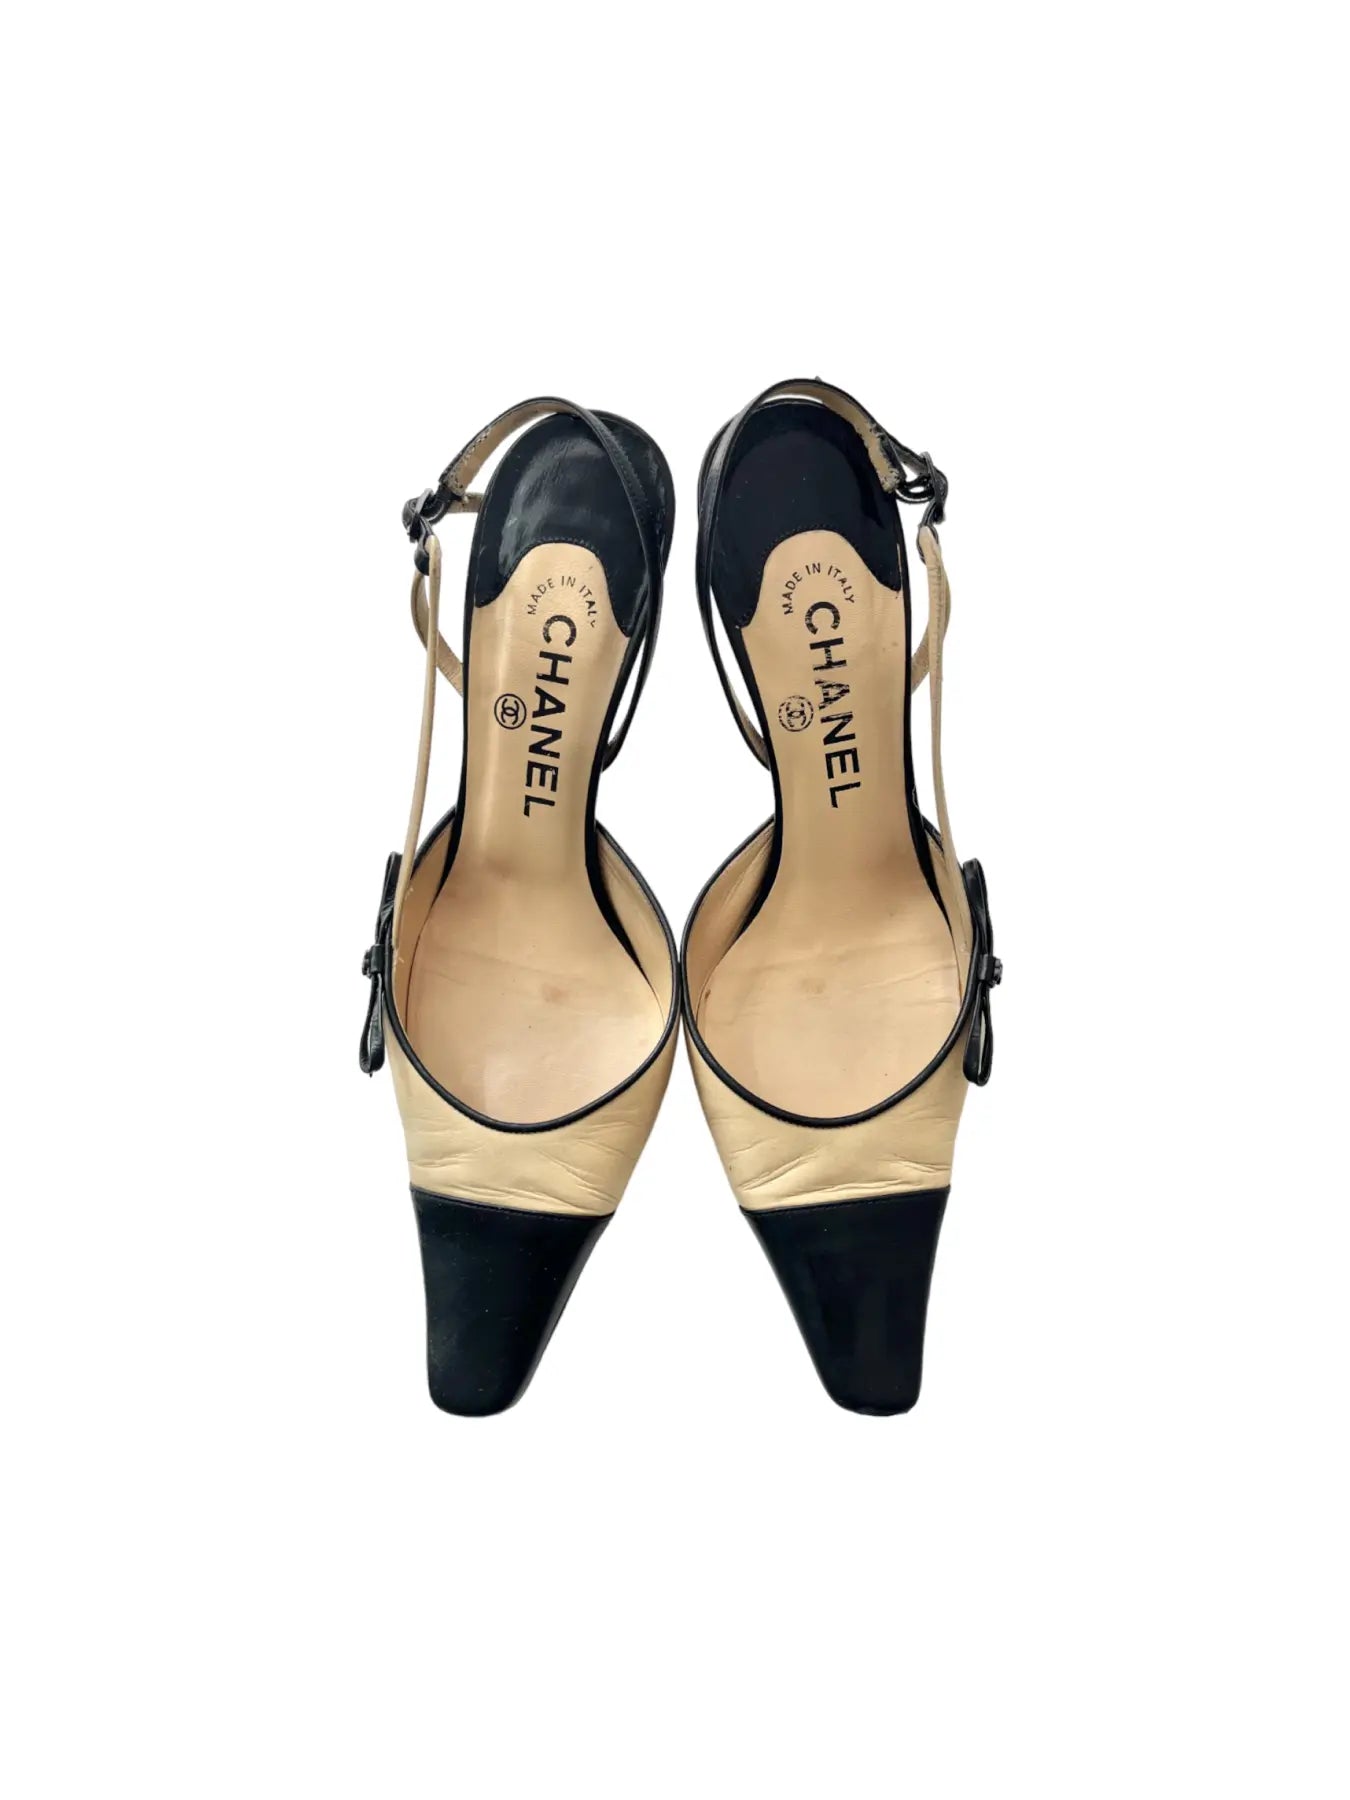 controller Minimer rulle CHANEL Slingback Heels, 37 – Archive Square